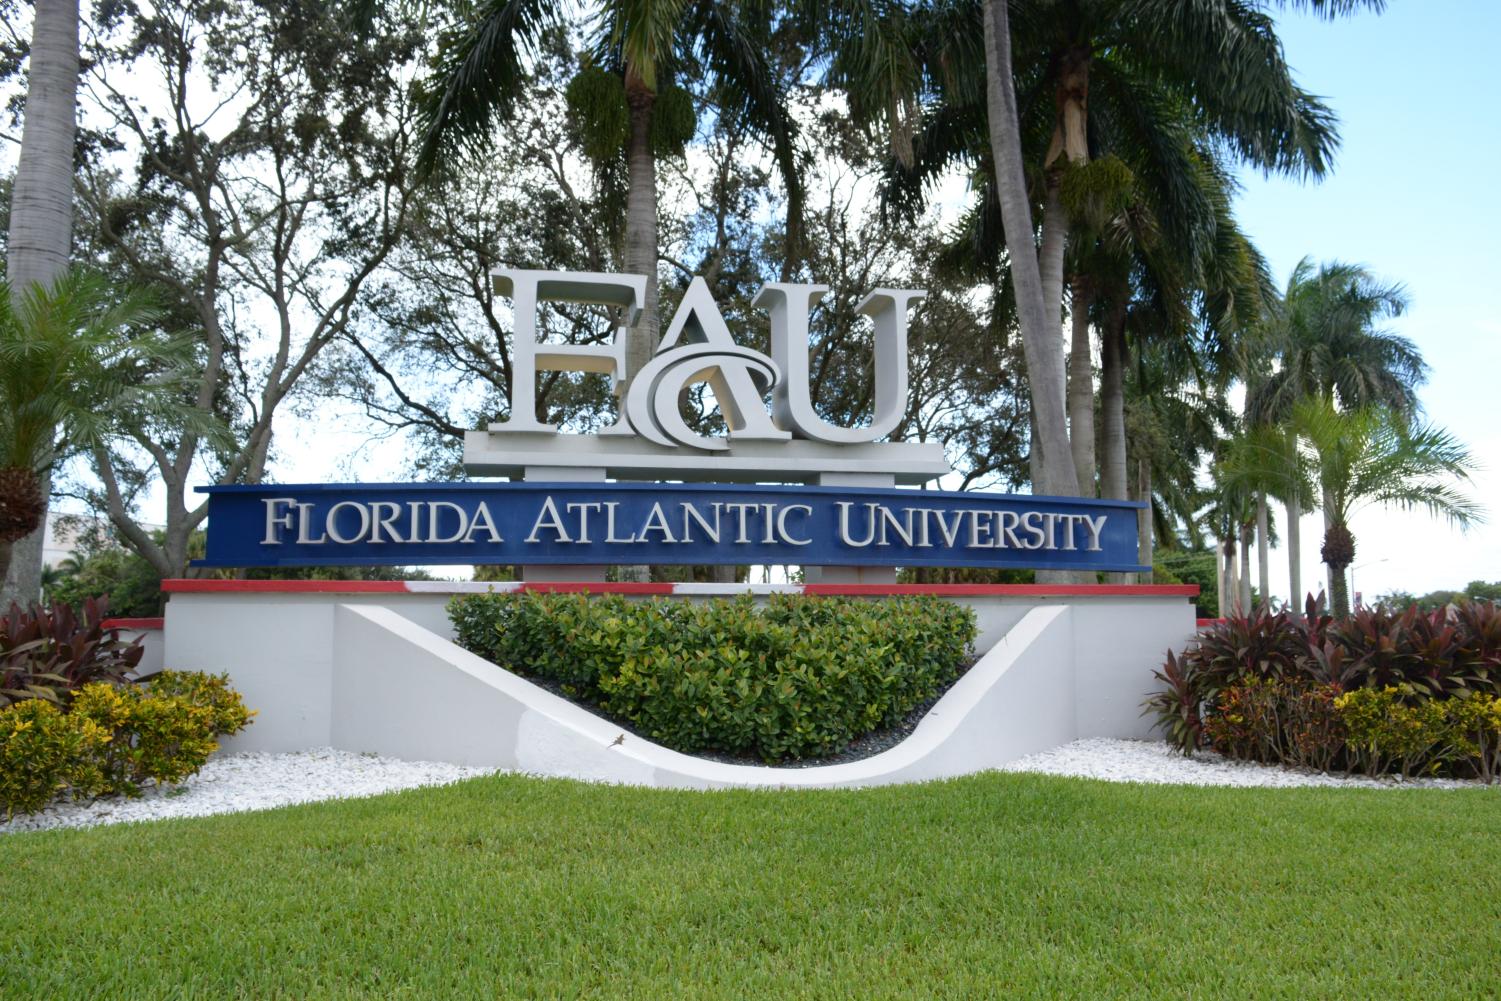 Students criticize FAU Housing shutting down A/C and elevators on short